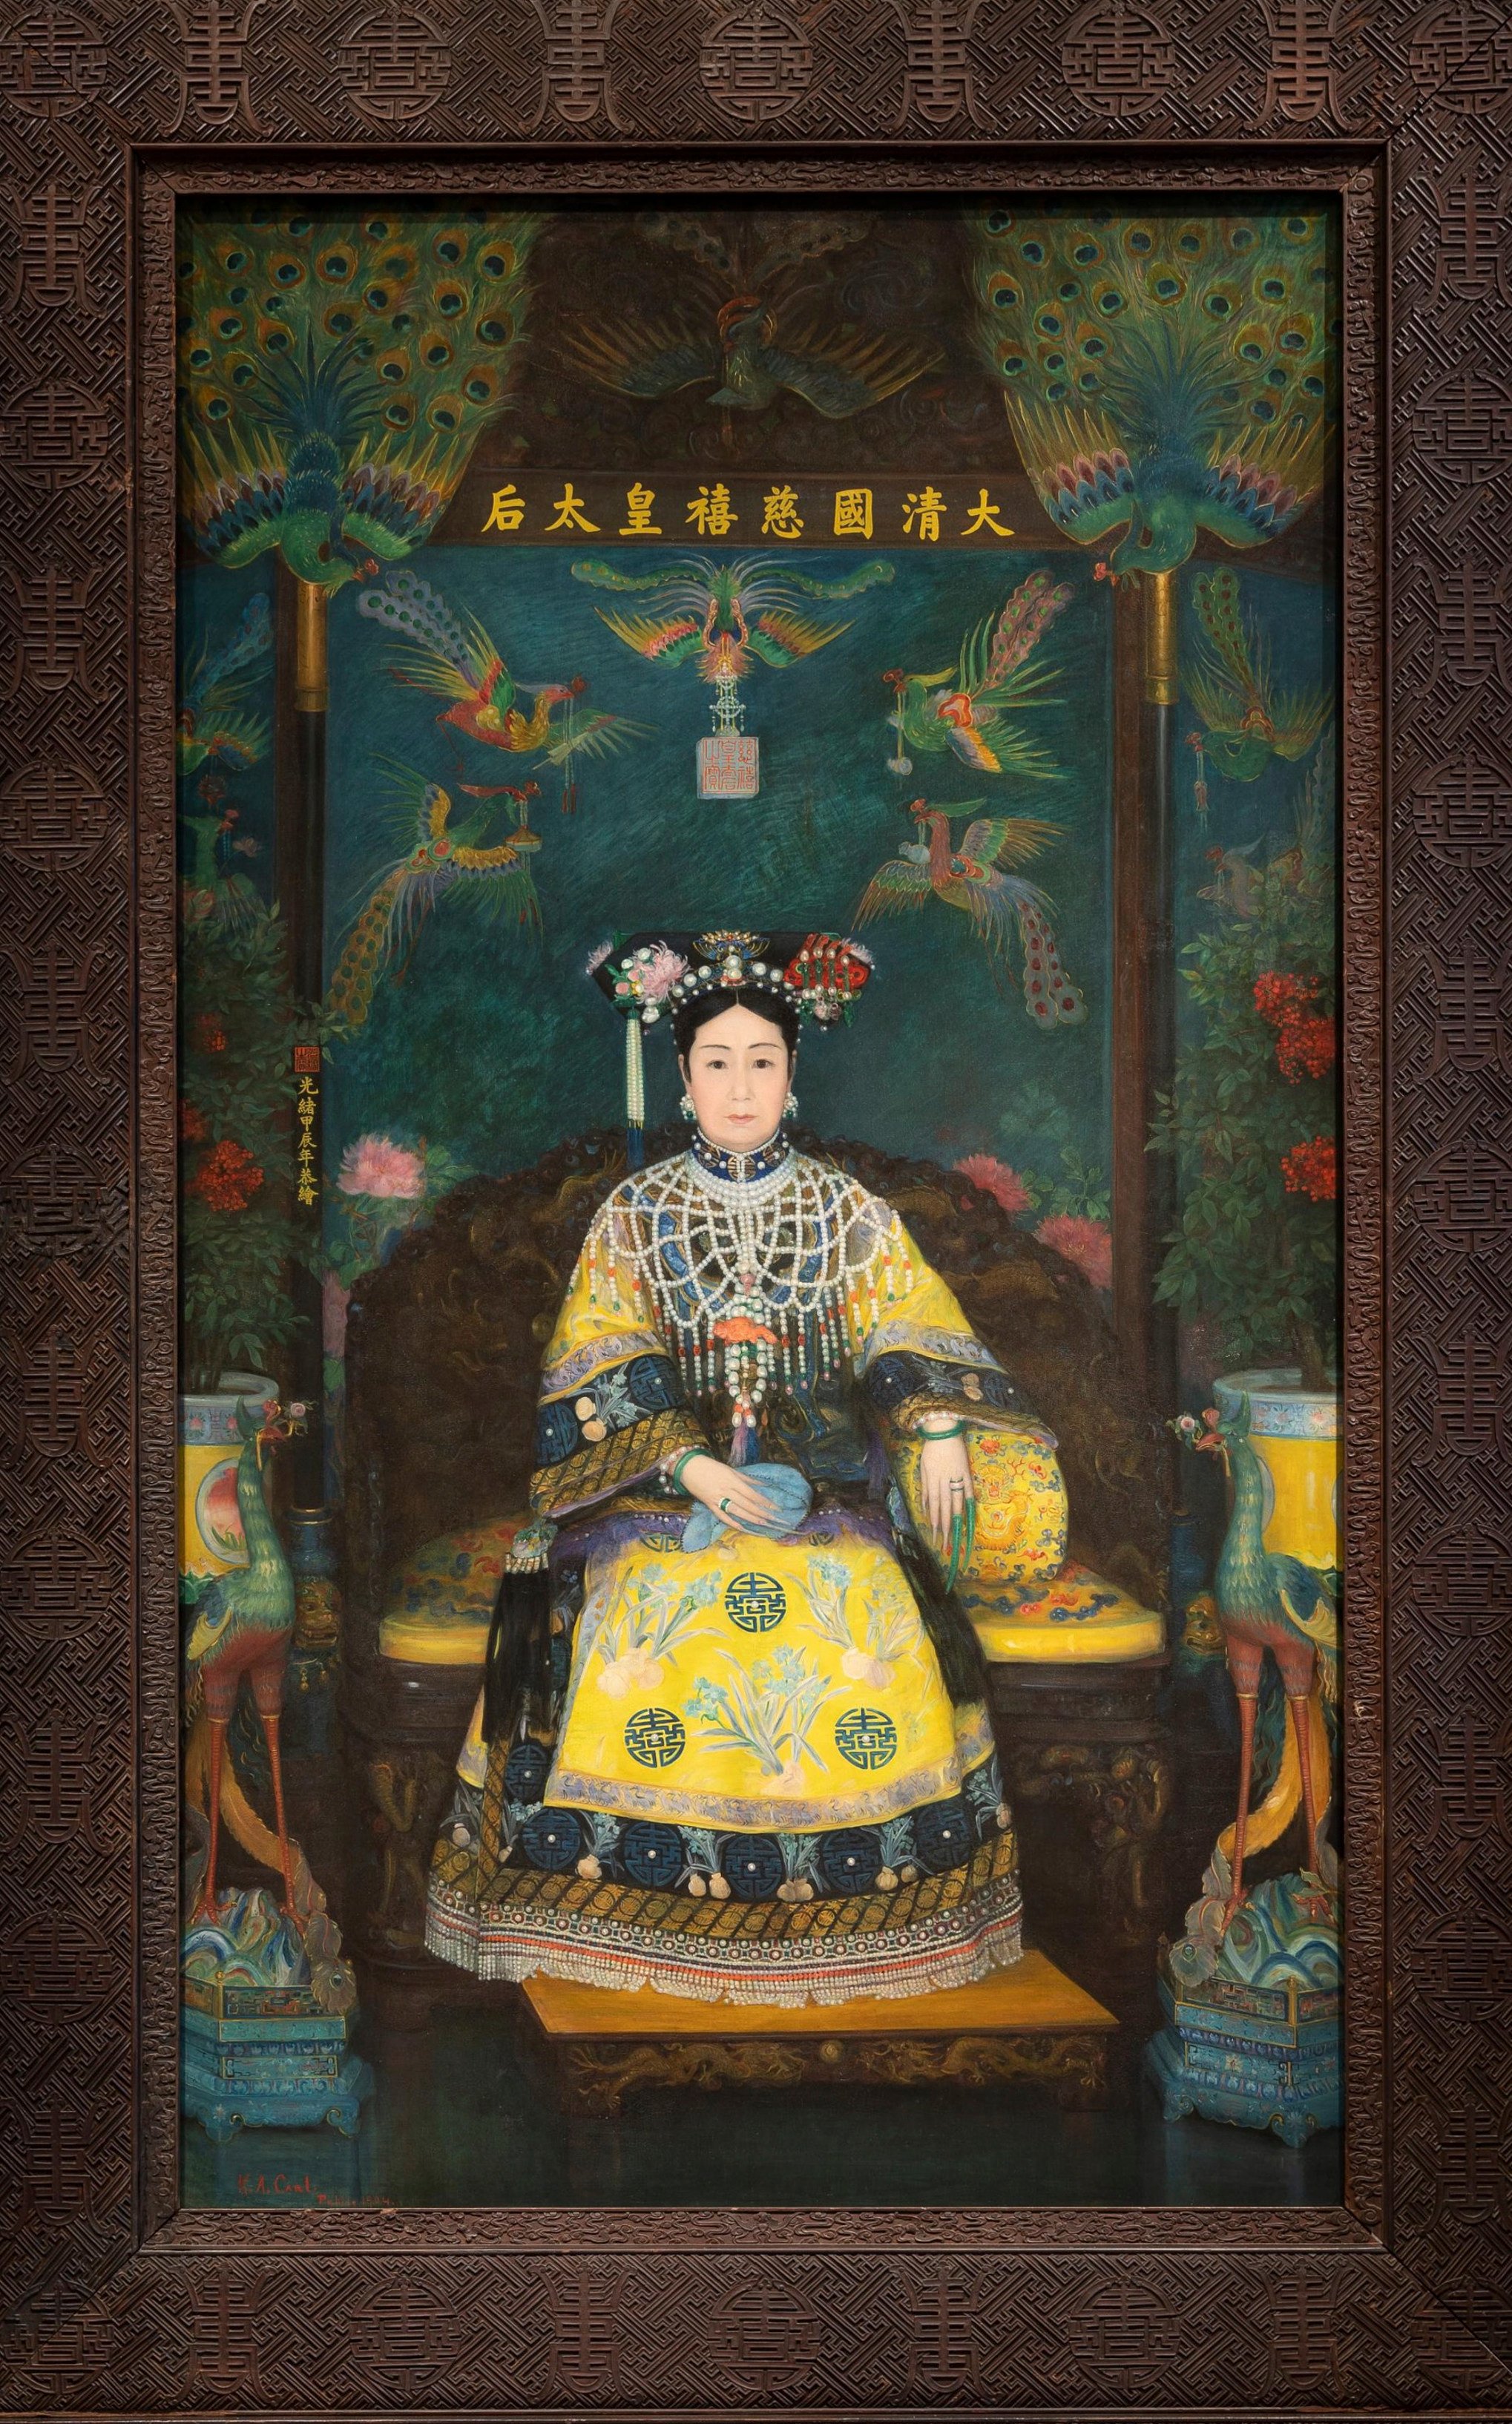 The portrait of Empress Dowager Cixi in its camphor wood frame painted by American artist Katharine Carl in Beijing in 1903. Photo: Katharine Carl/Smithsonian Institution